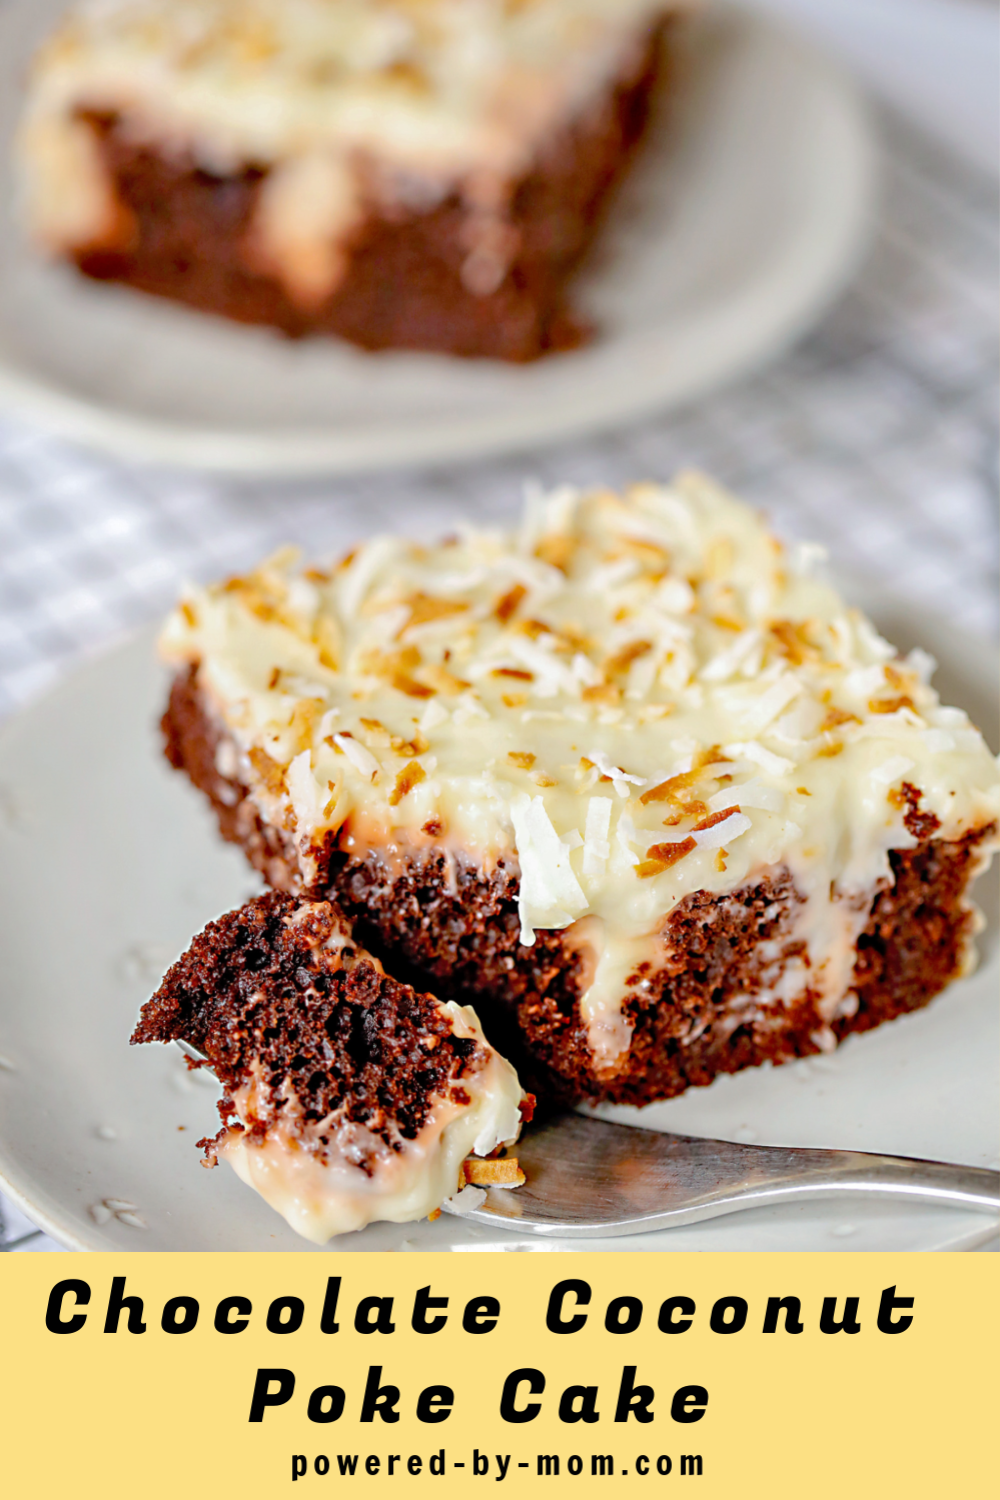 Chocolate Coconut Poke Cake with toasted coconut and homemade coconut pudding